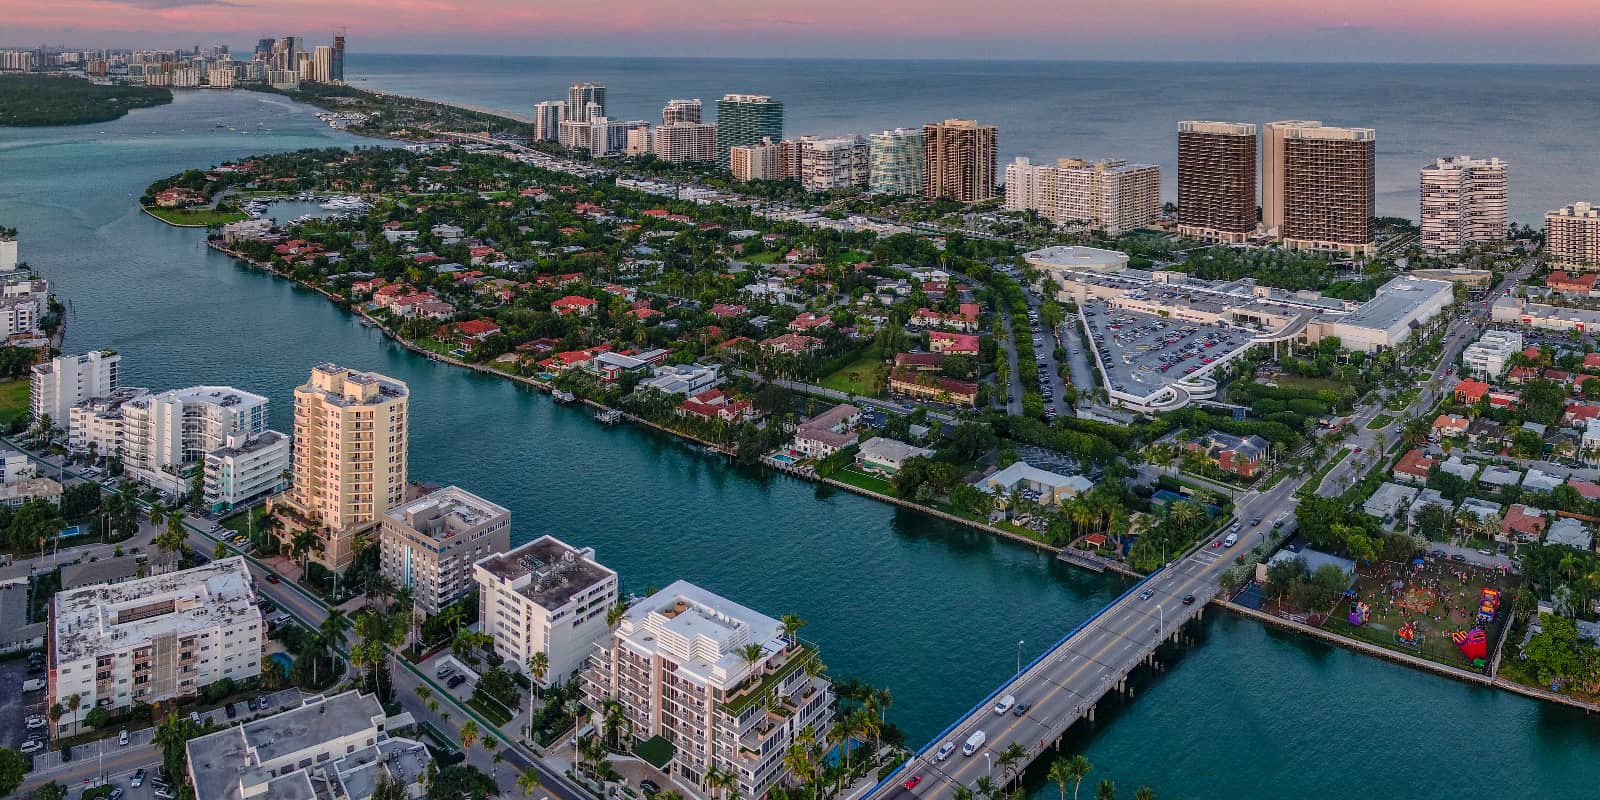 Aerial view of Bal Harbour and Bay harbor Islands Bridge from Bay Harbor Islands.